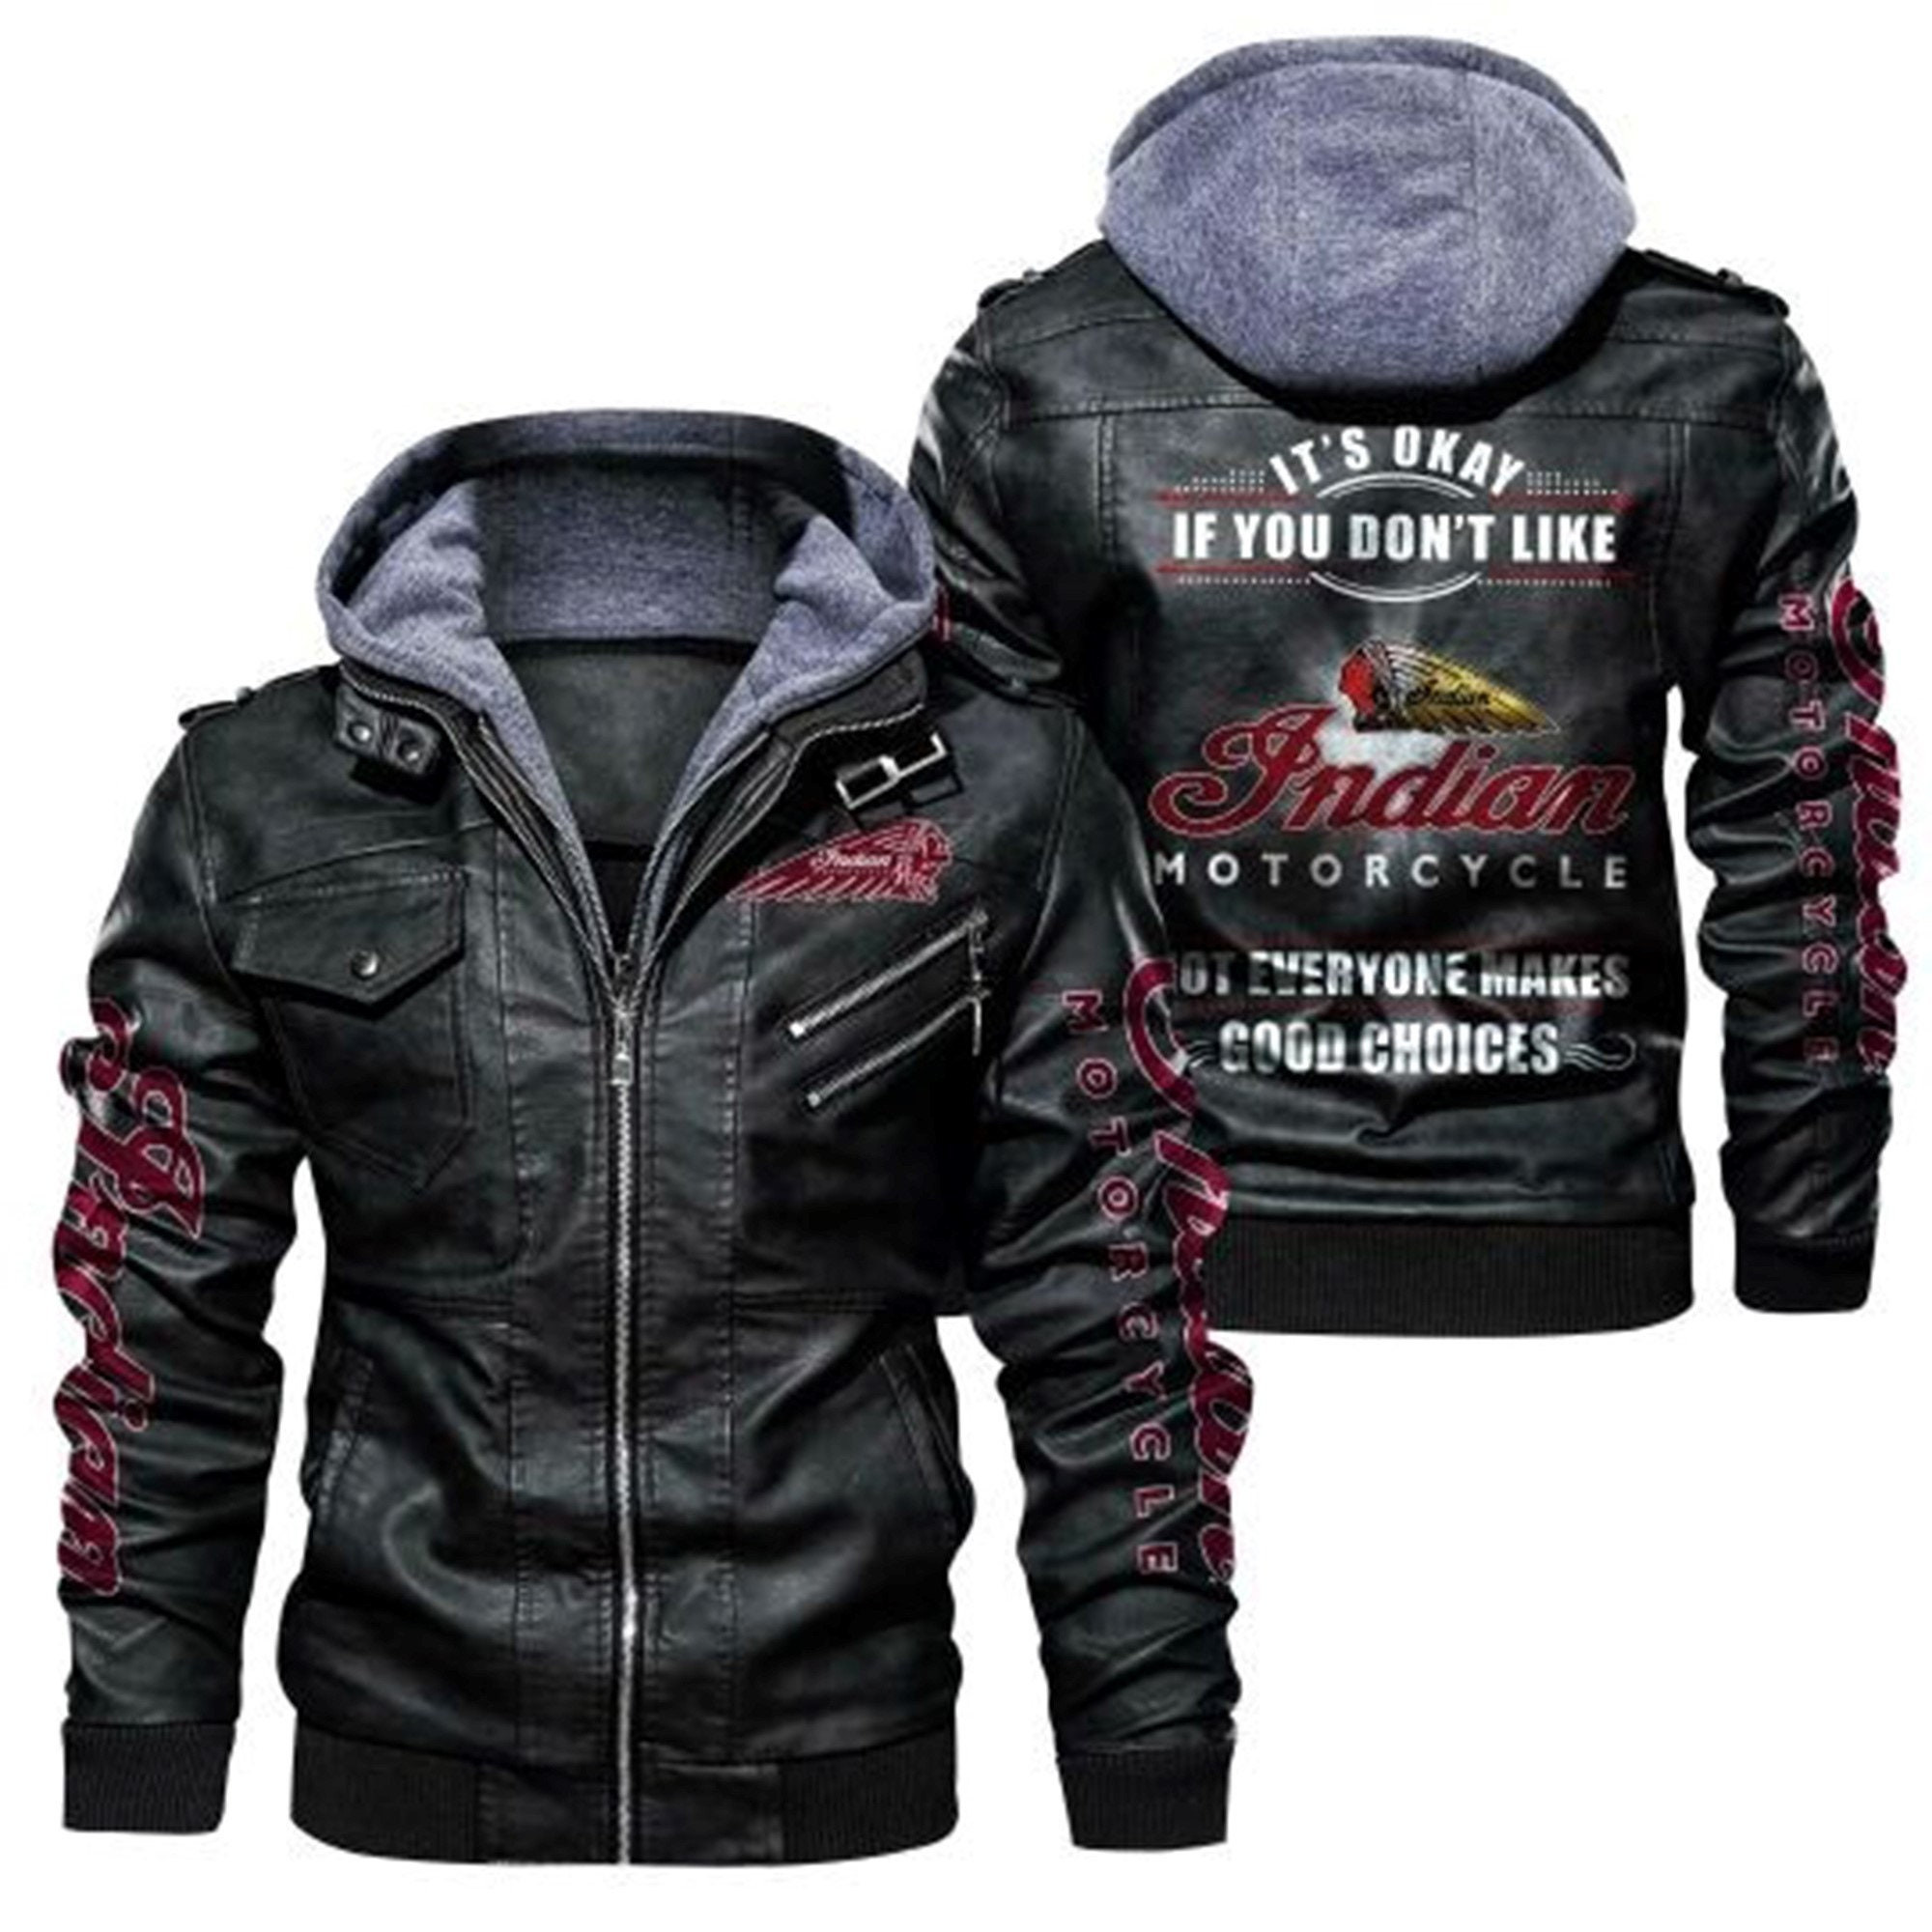 These Amazing Leather Jacket will add to the appeal of your outfit 220